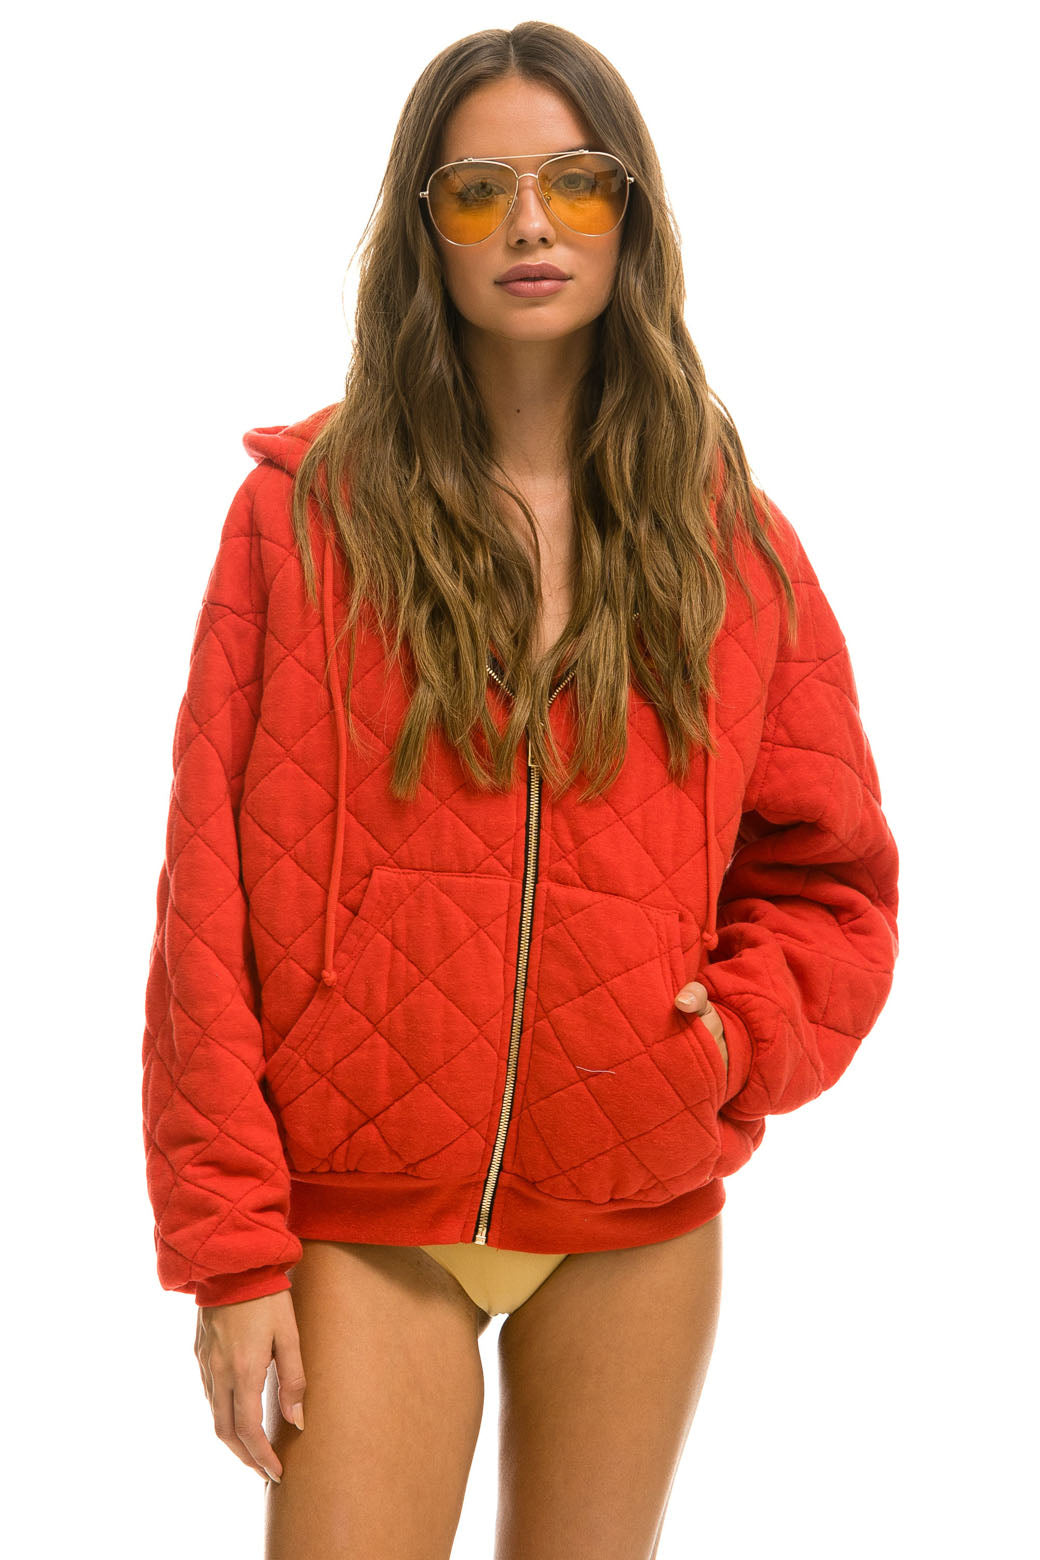 Burberry Ashurst Classic Modern Quilted Jacket Parade Red, $595, Neiman  Marcus